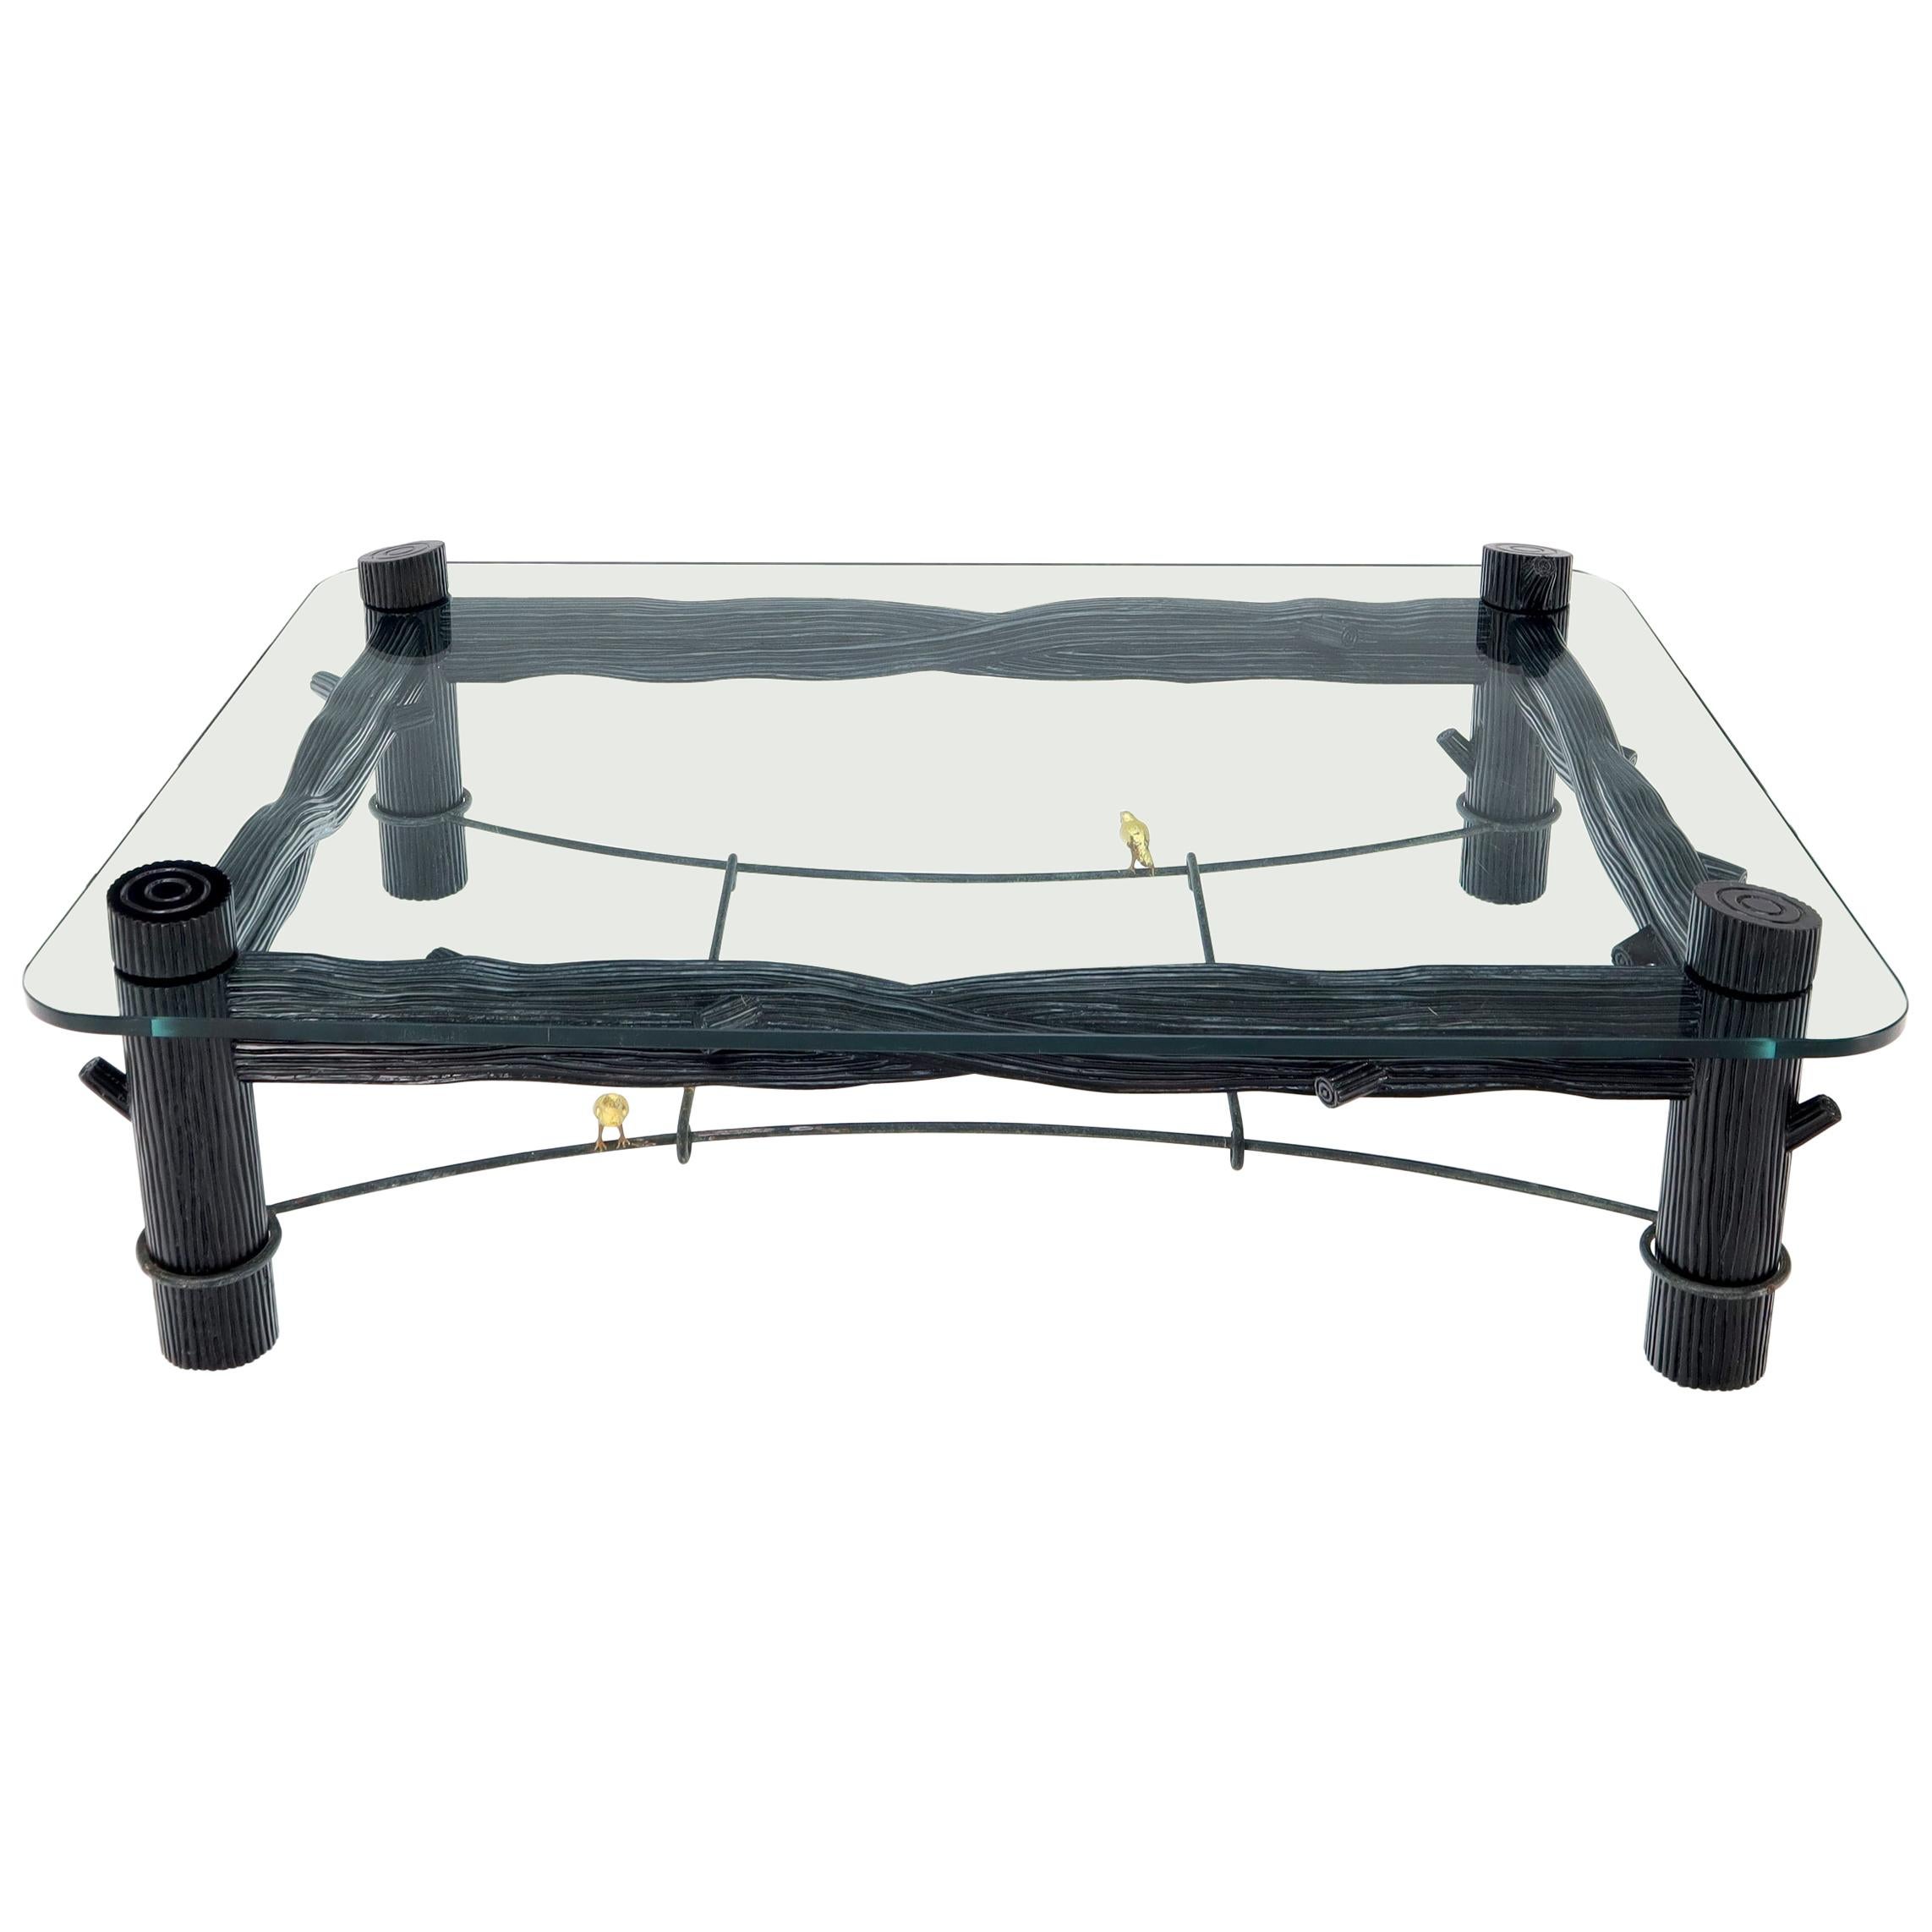 Large Brazilian Midcentury Coffee Table With Thick Glass Top At 1stdibs